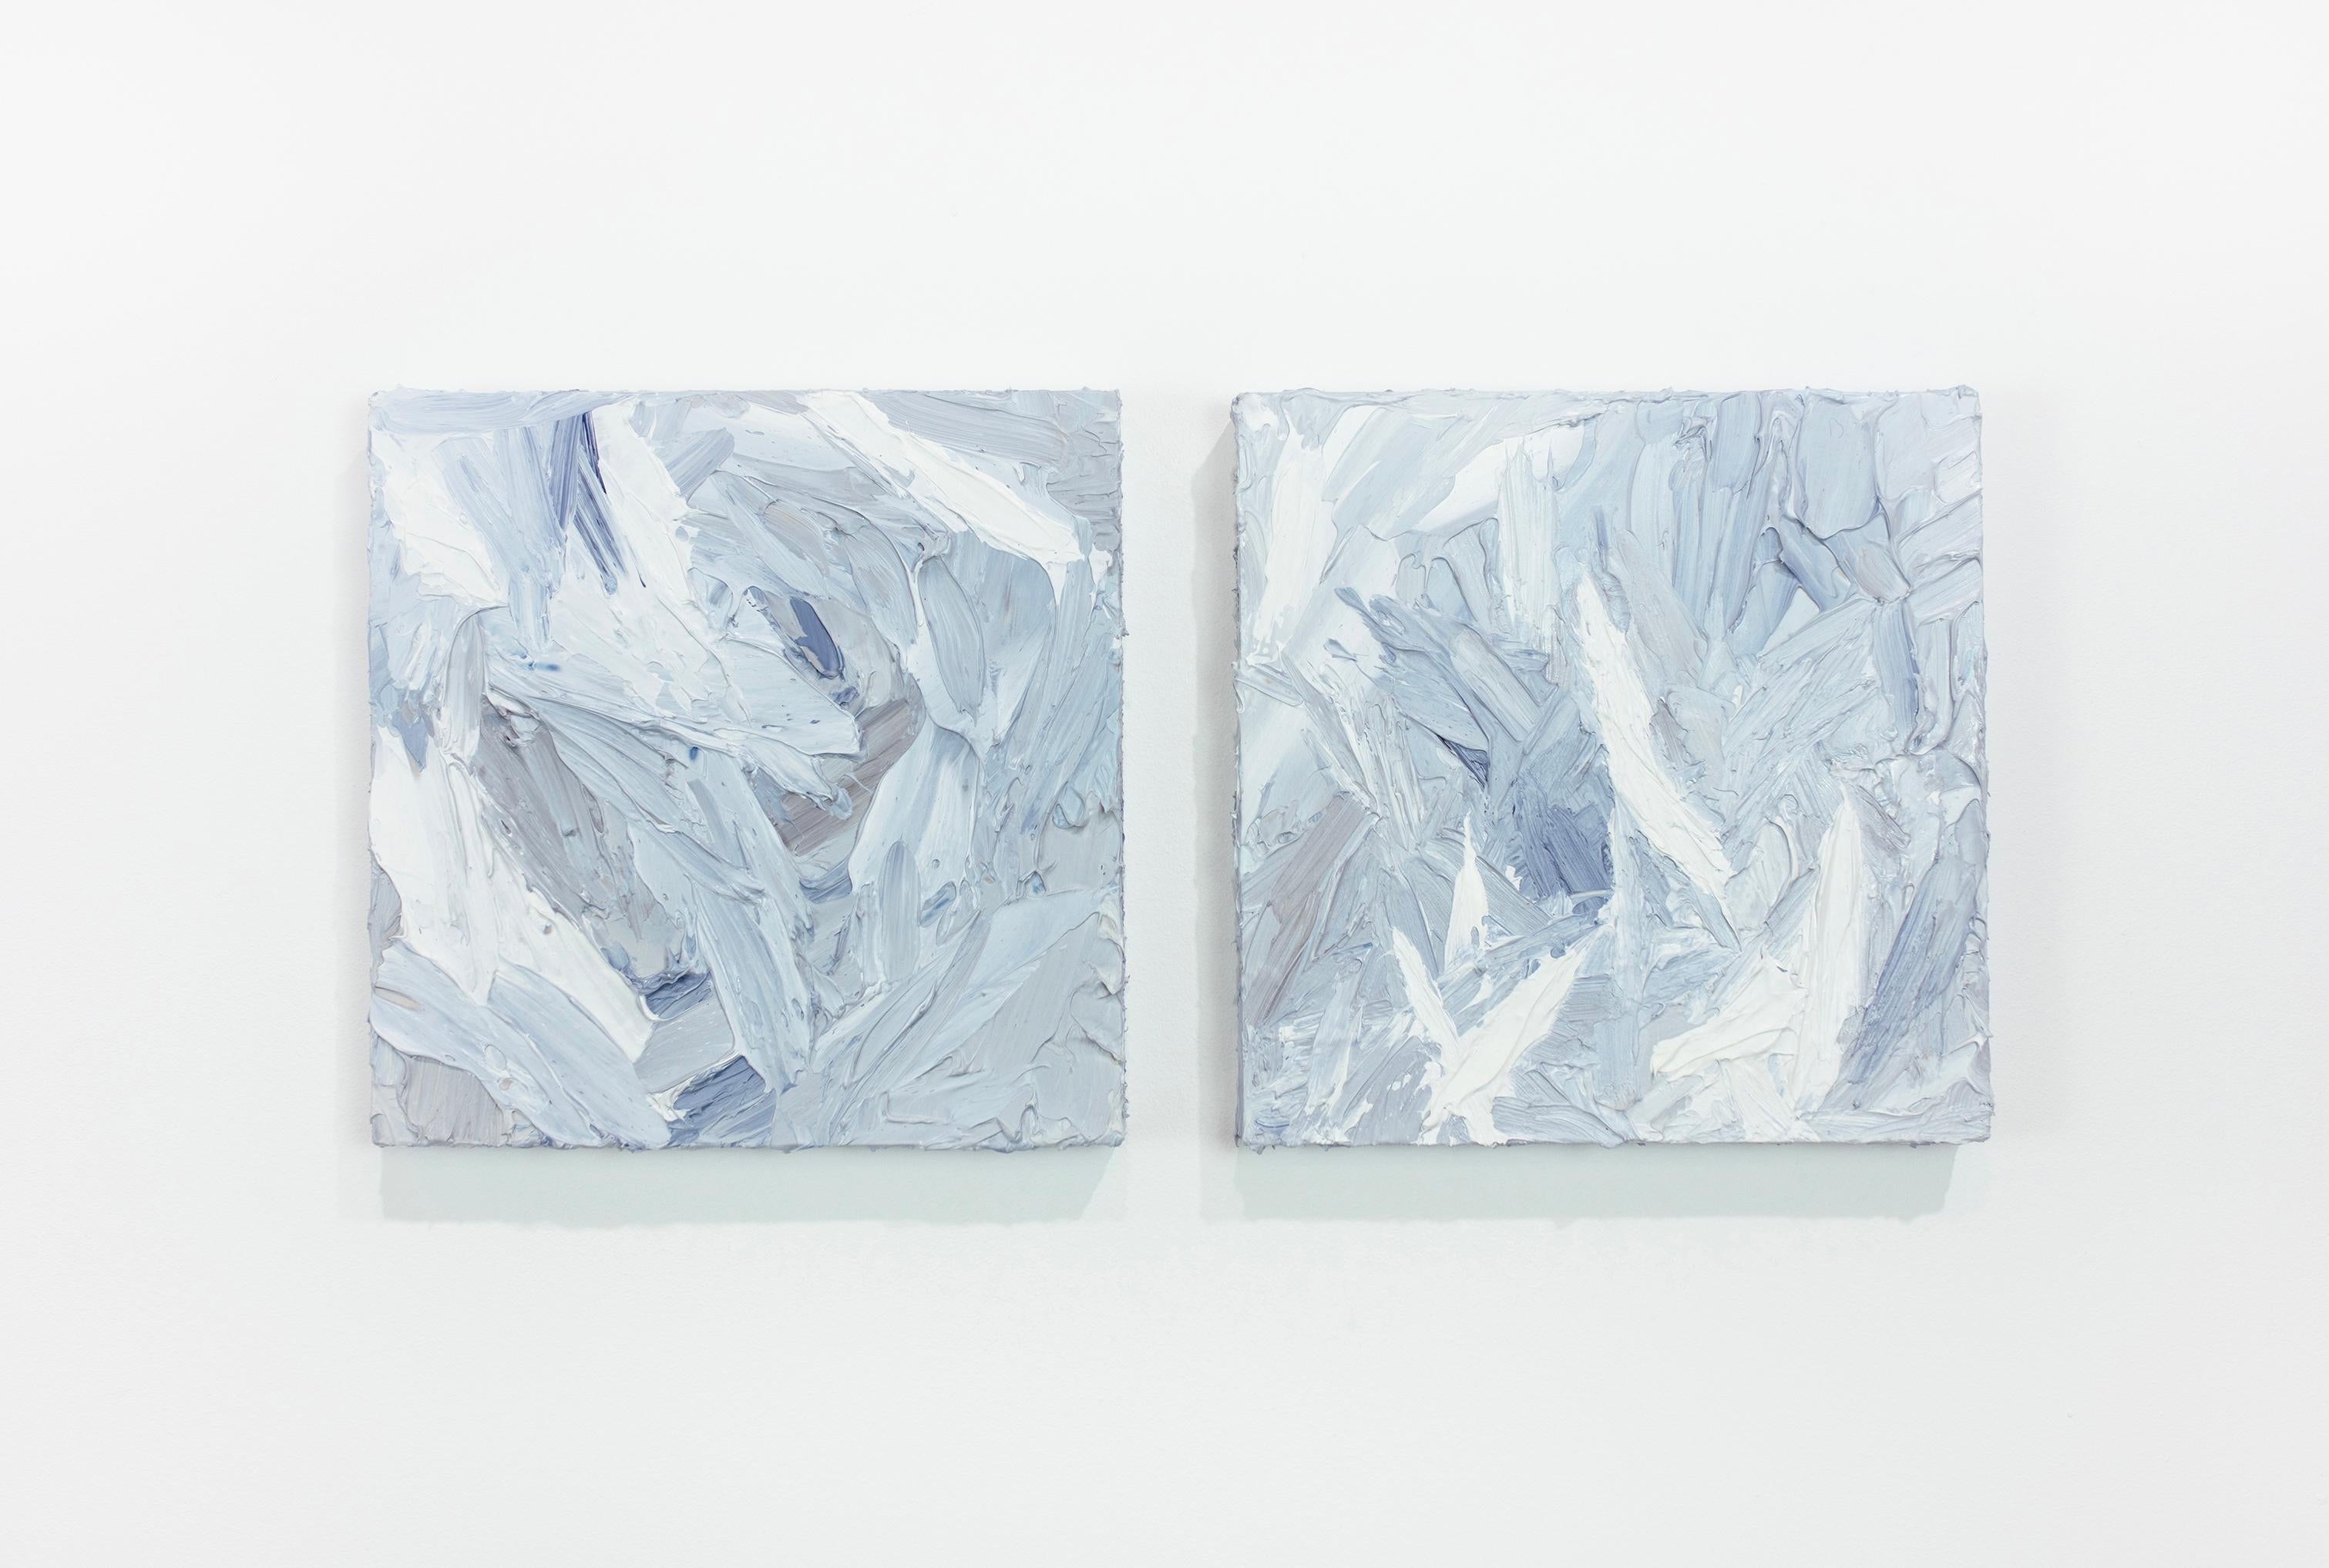 This textured abstract diptych by Teodora Guererra features a light blue, grey, and white palette. The artist layers thick strokes of paint using a palette knife over board, creating an abstract composition and highly textured finish on the surface.